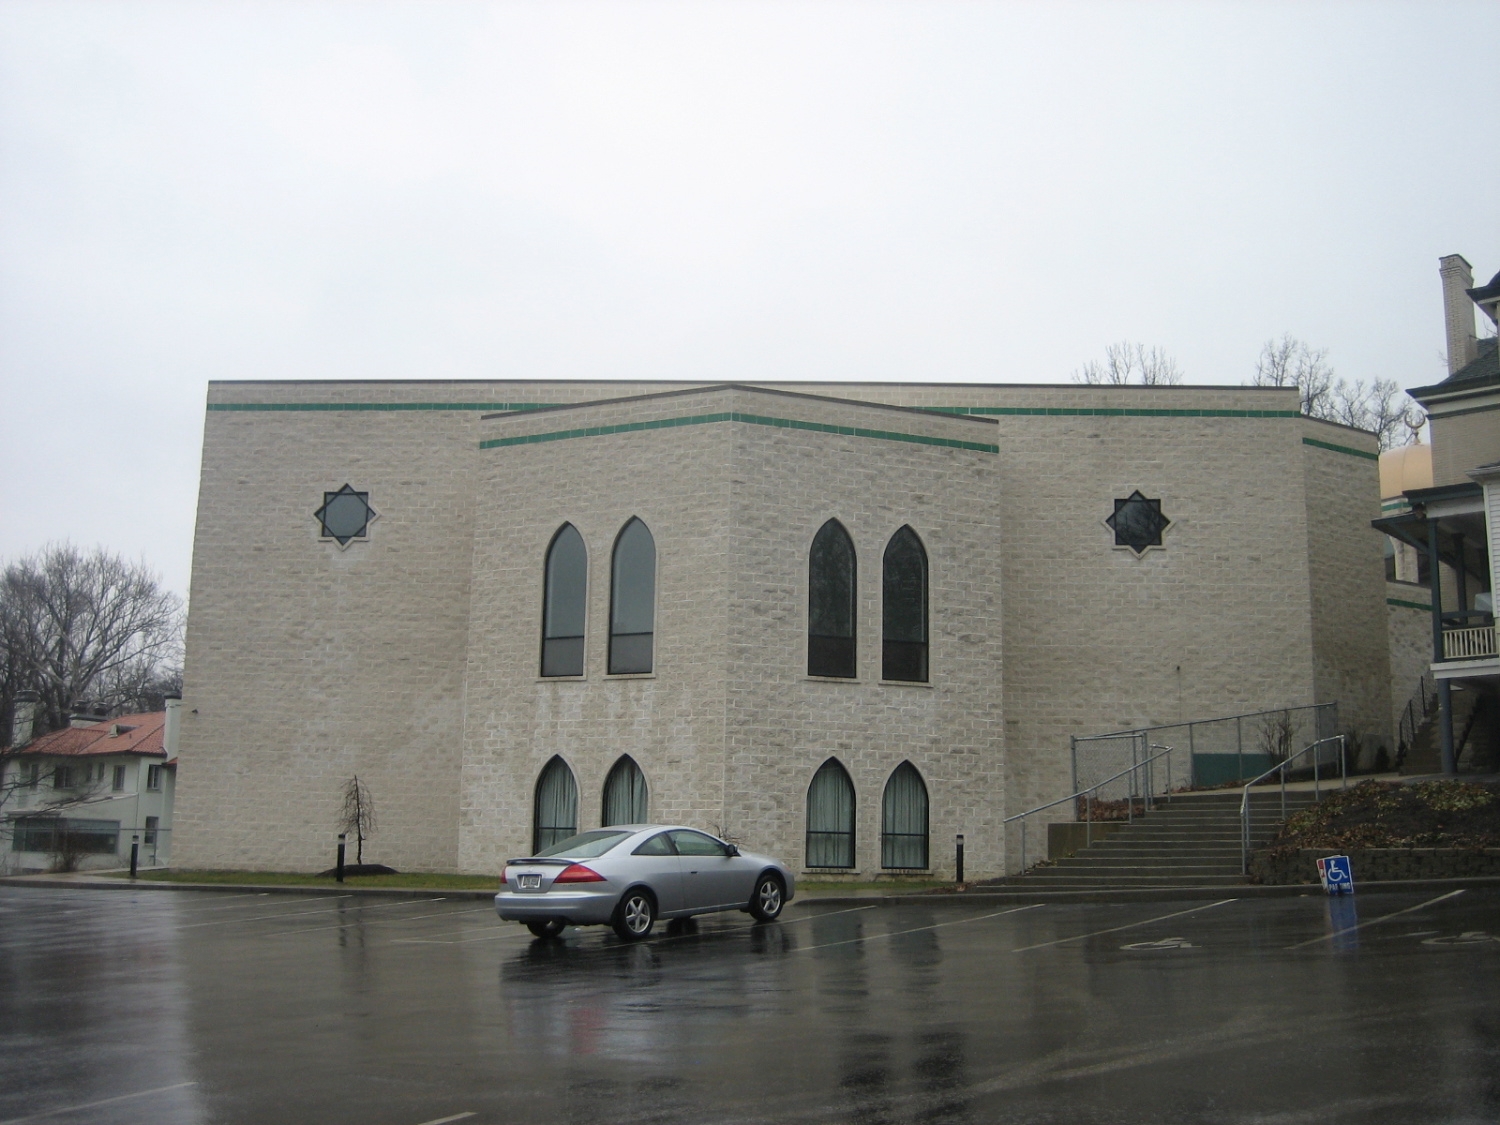 Eastern (rear) face of the mosque, from the parking lot